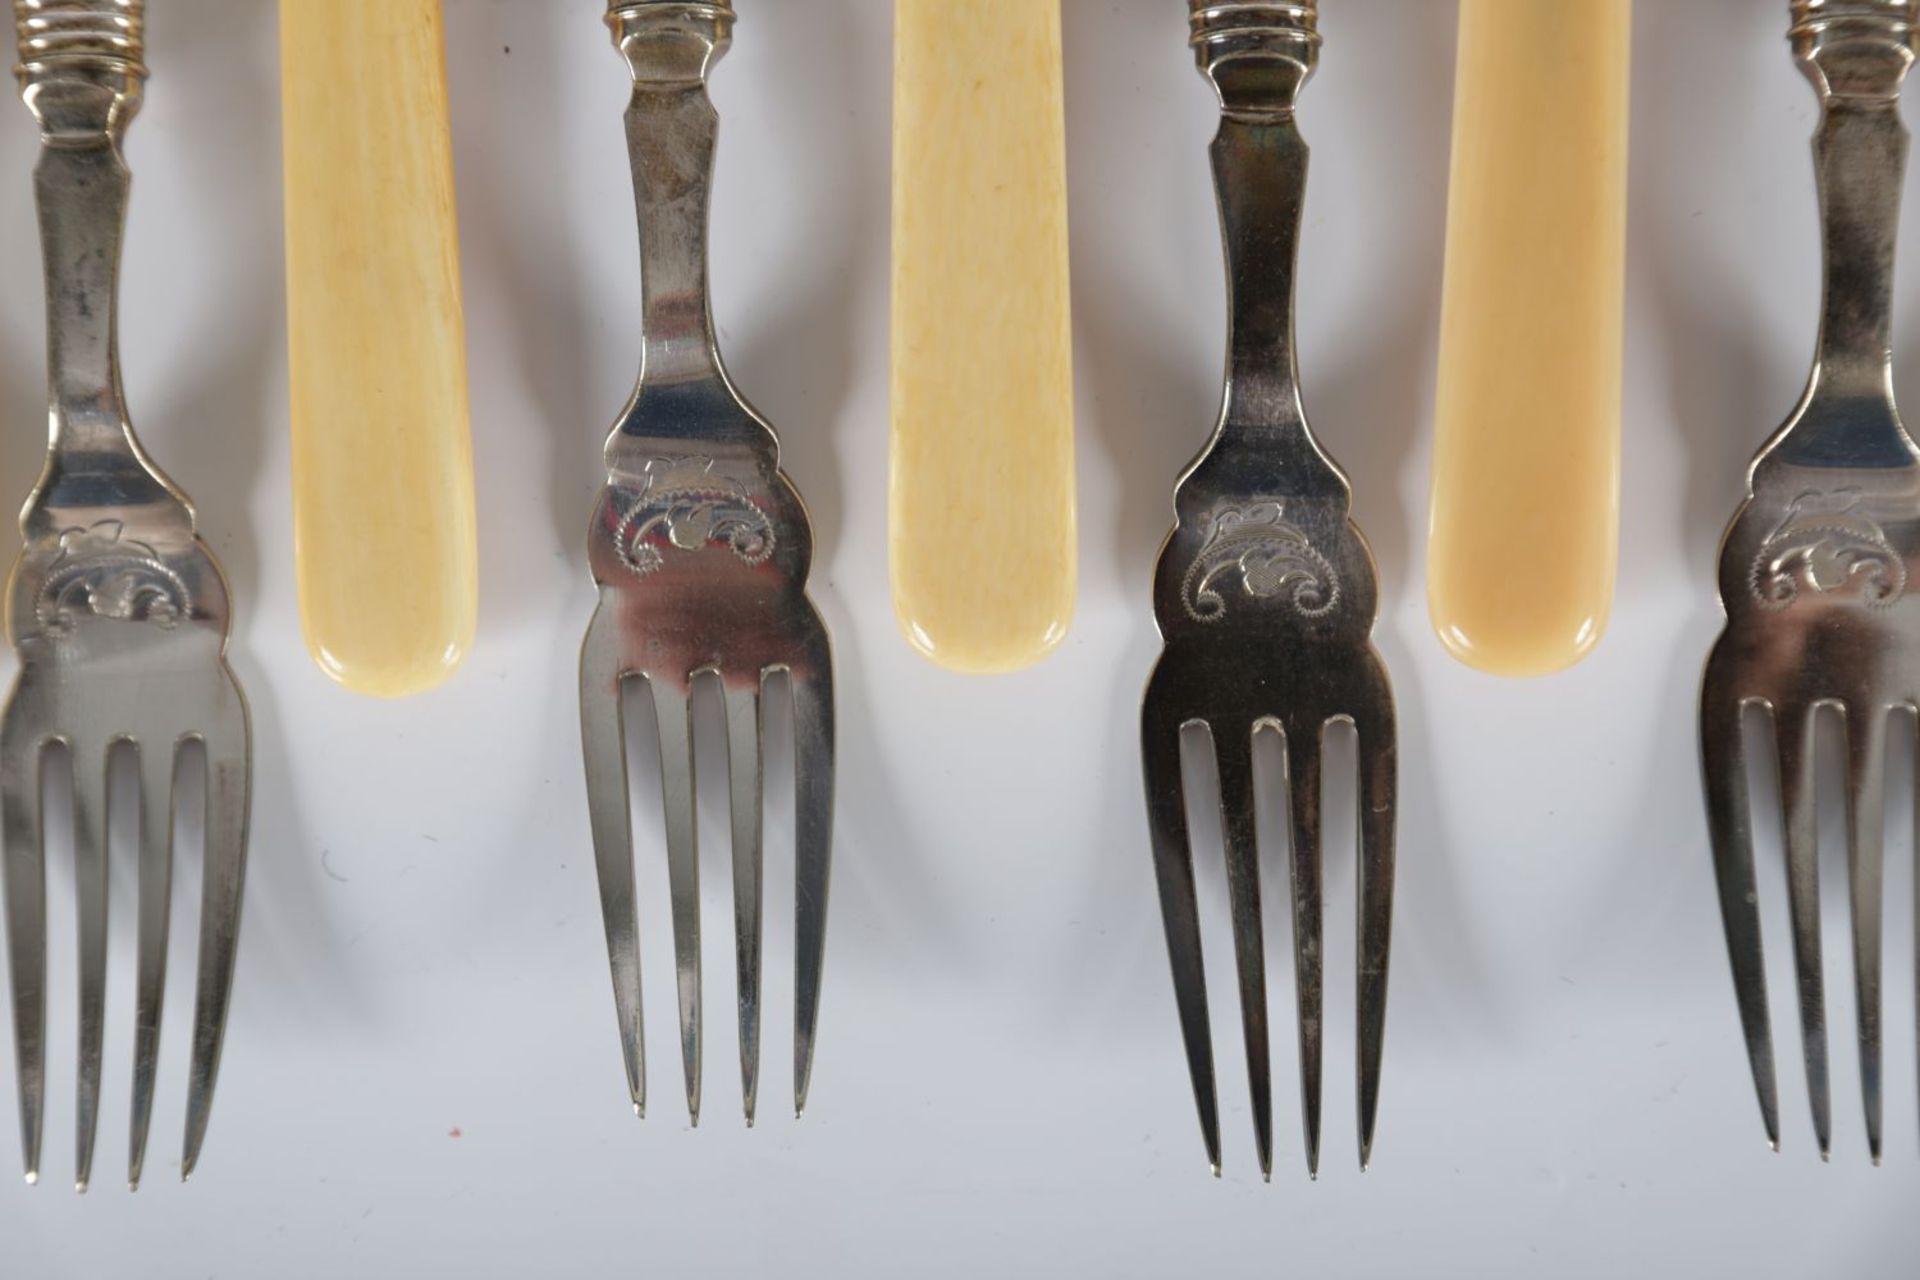 SET OF 6 FISH KNIVES AND FORKS - Image 3 of 4